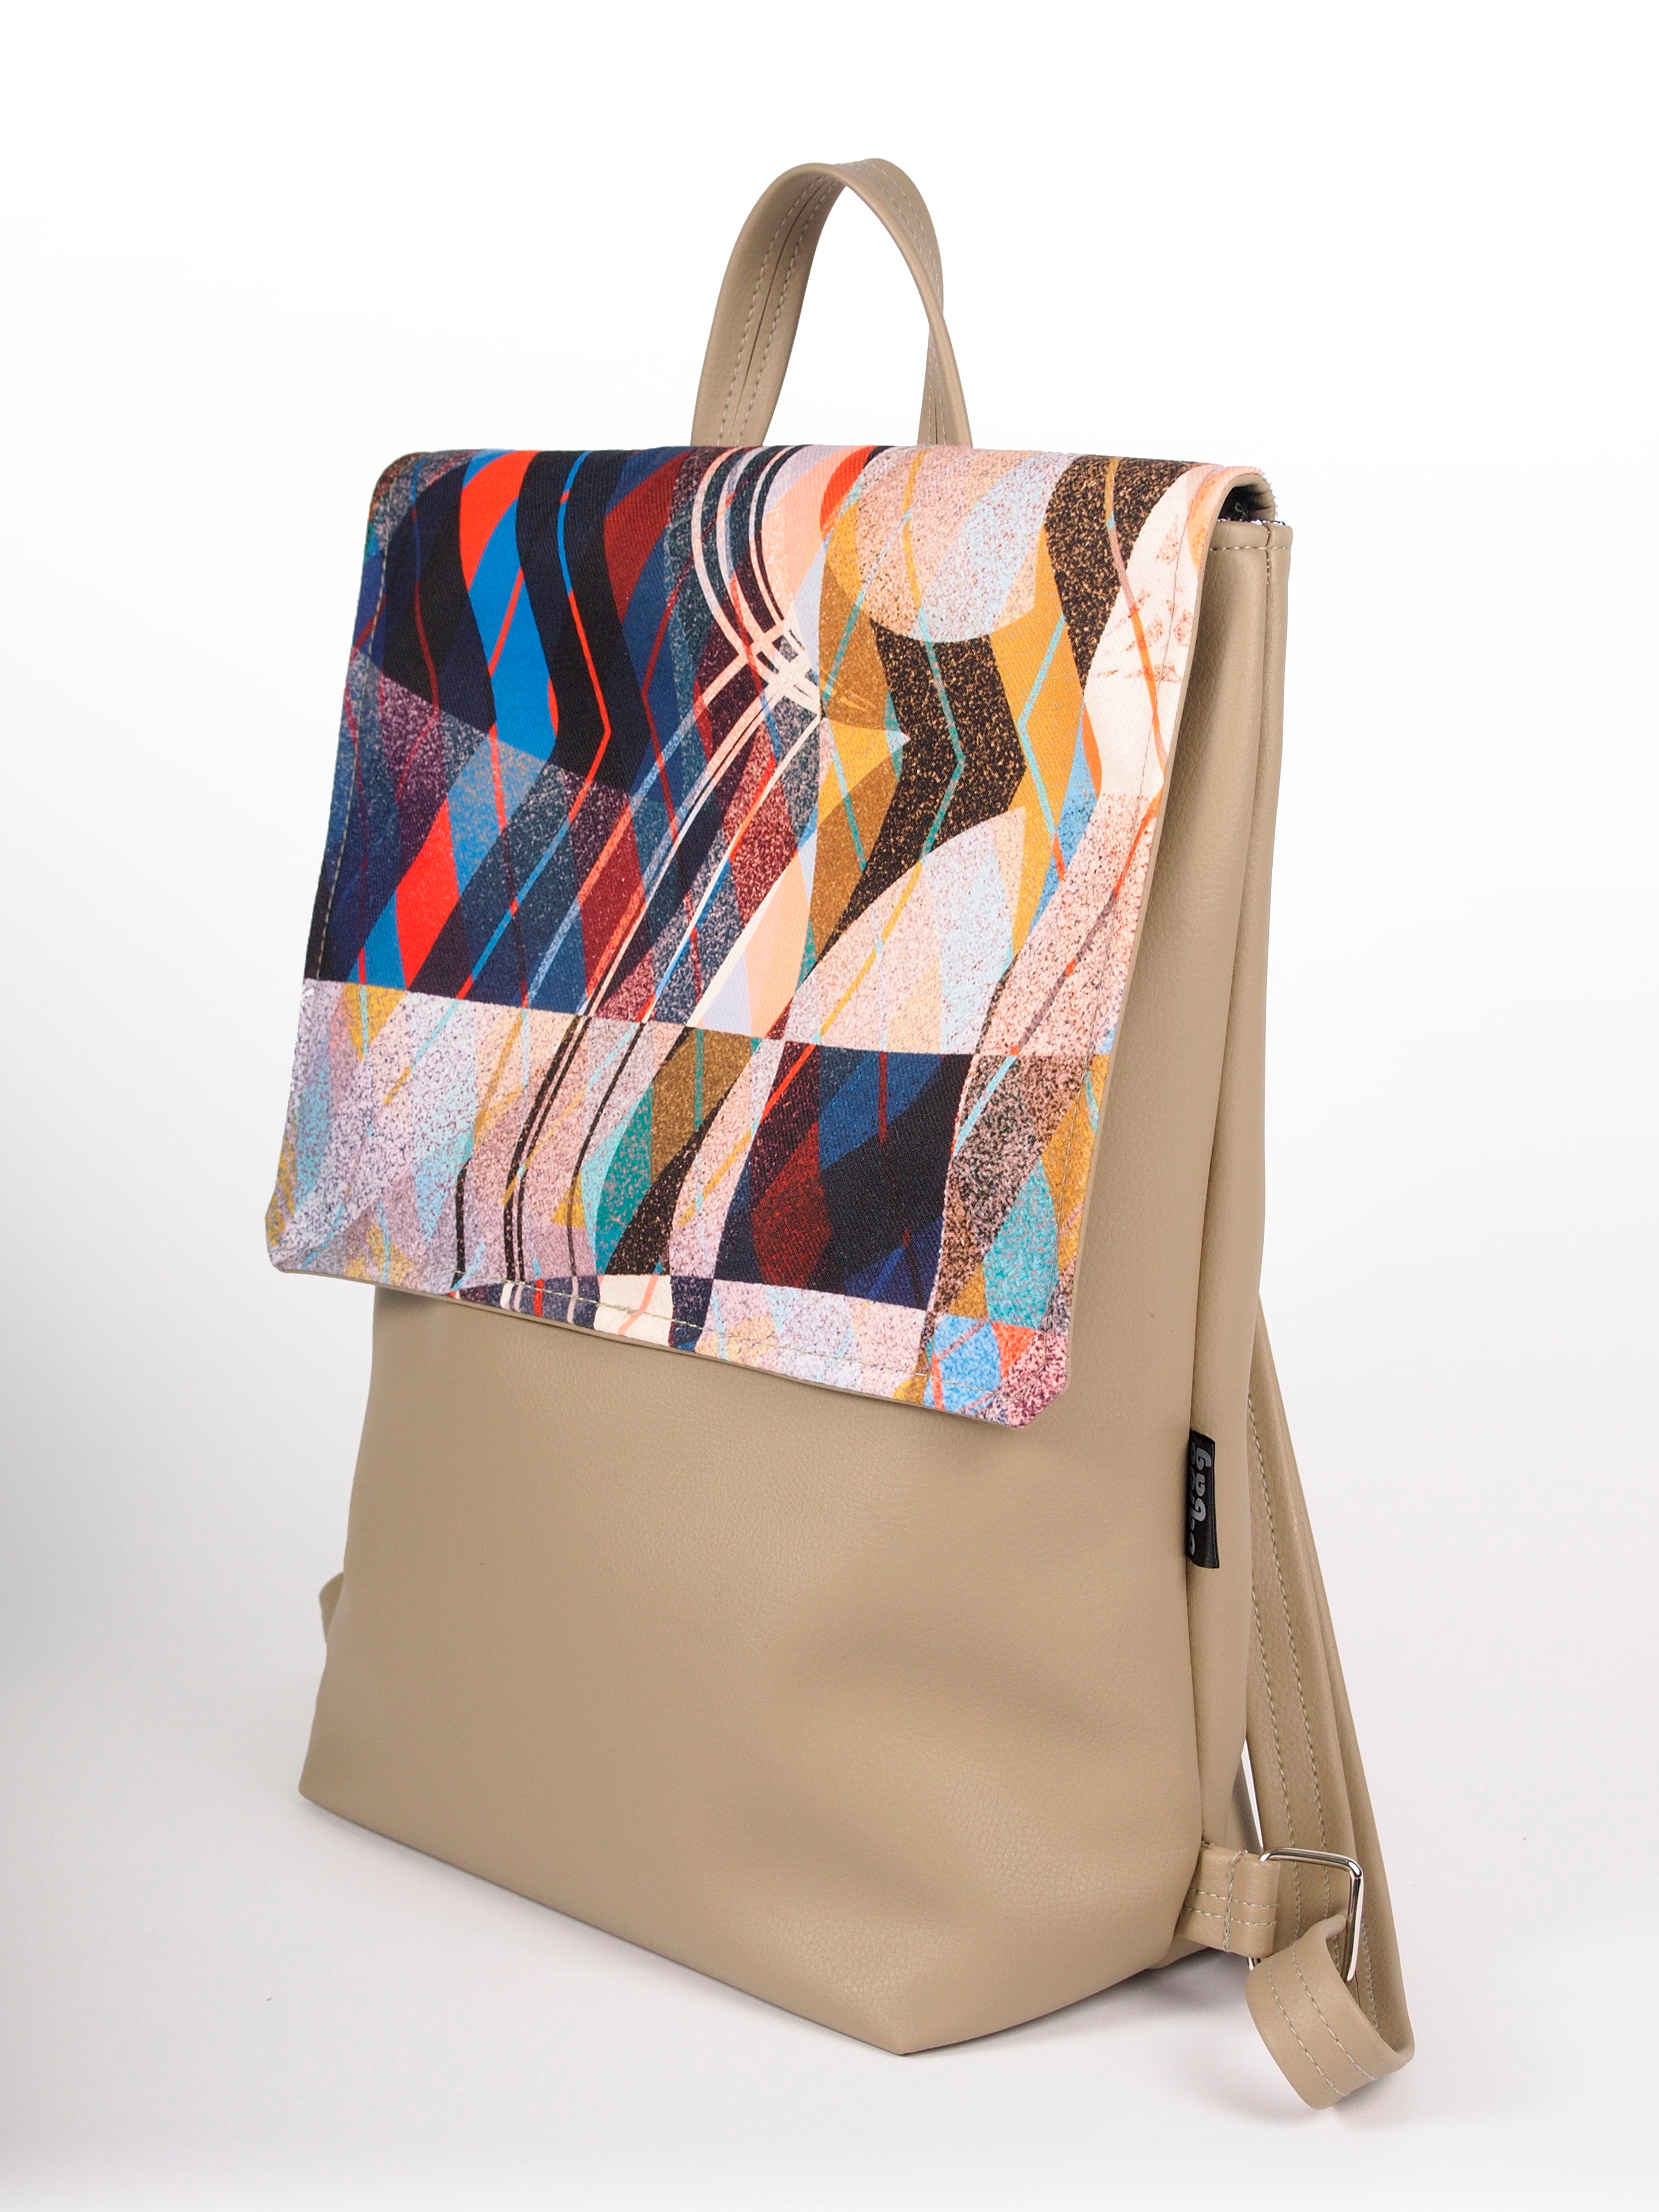 Bardo backpack large - On the beach - Premium backpack large from BARDO ART WORKS - Just lvbeige, brown, gift, handemade, natural, nature, painted patterns, spring, tablet, urban style, vegan leather, woman89.00! Shop now at BARDO ART WORKS